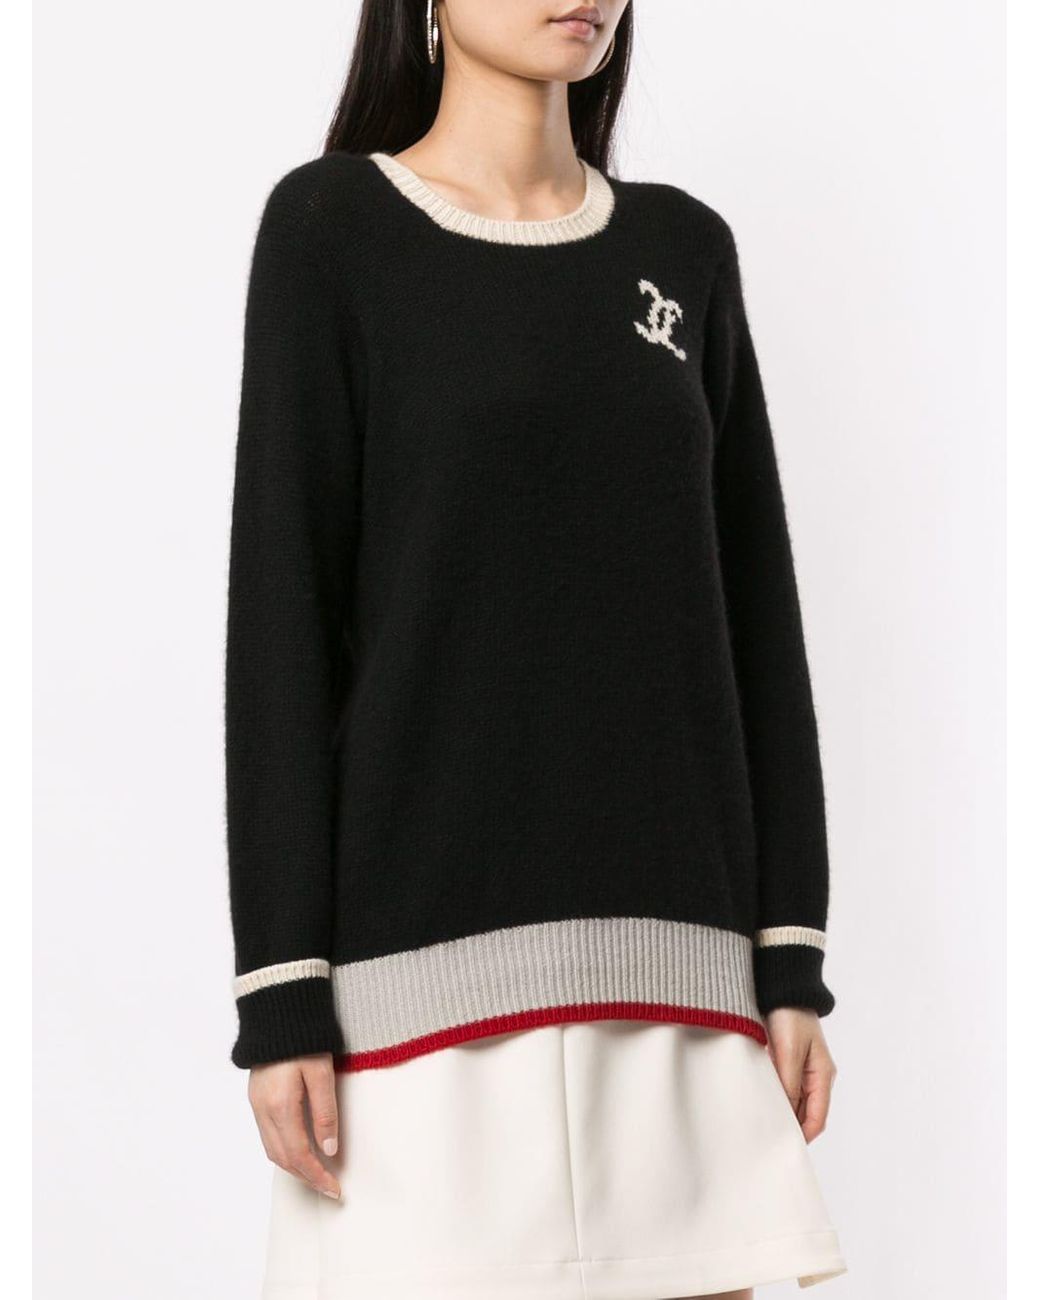 Chanel Pre-Owned Cc Logo Long Sleeve Cashmere Sweater in Black | Lyst